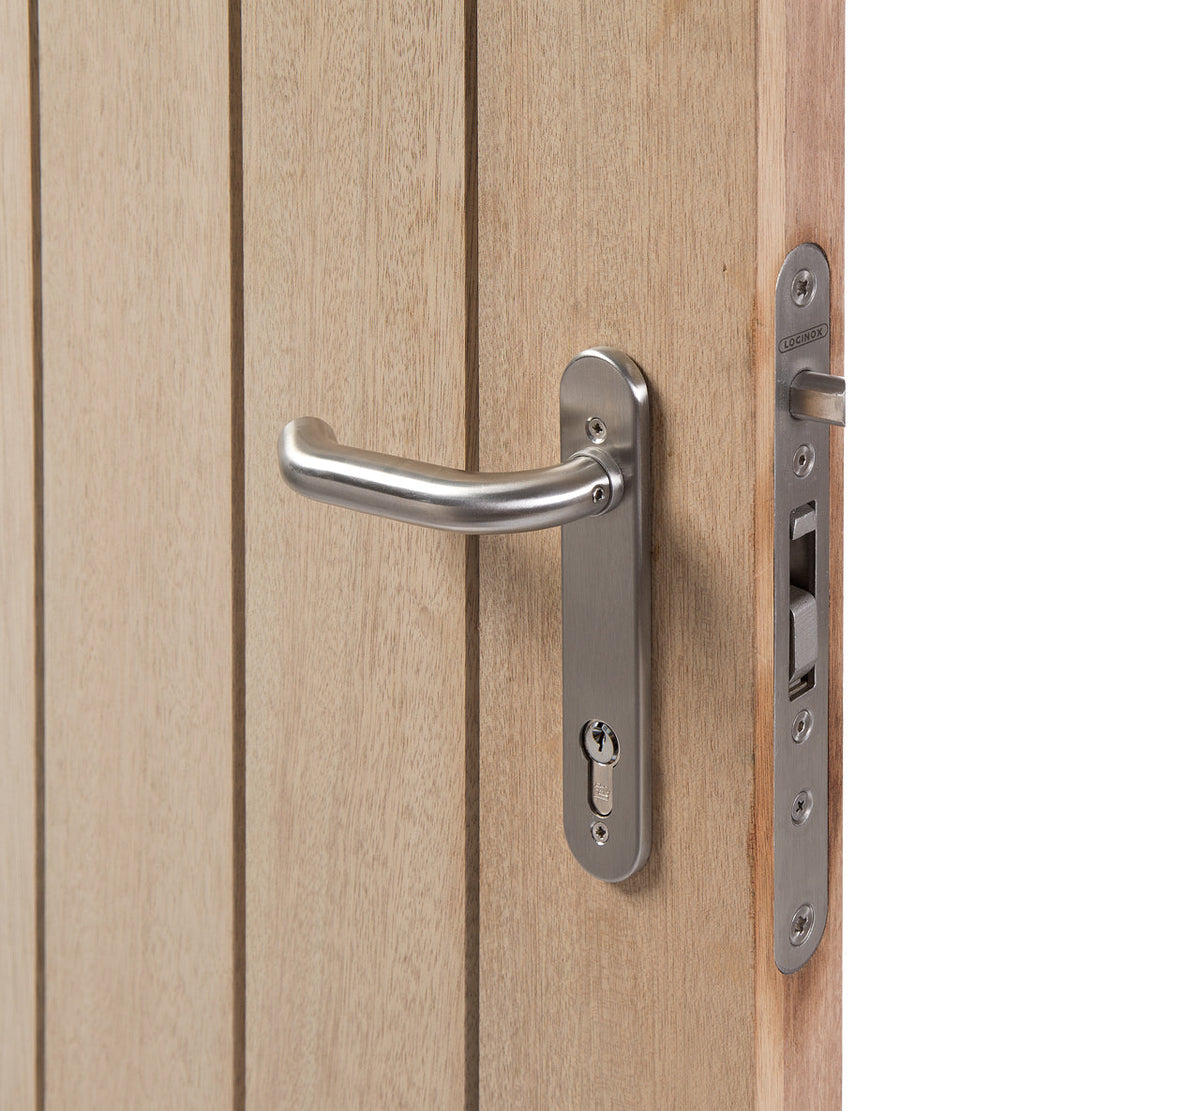 Mortise Lock for Wooden Gates - Sold Individually